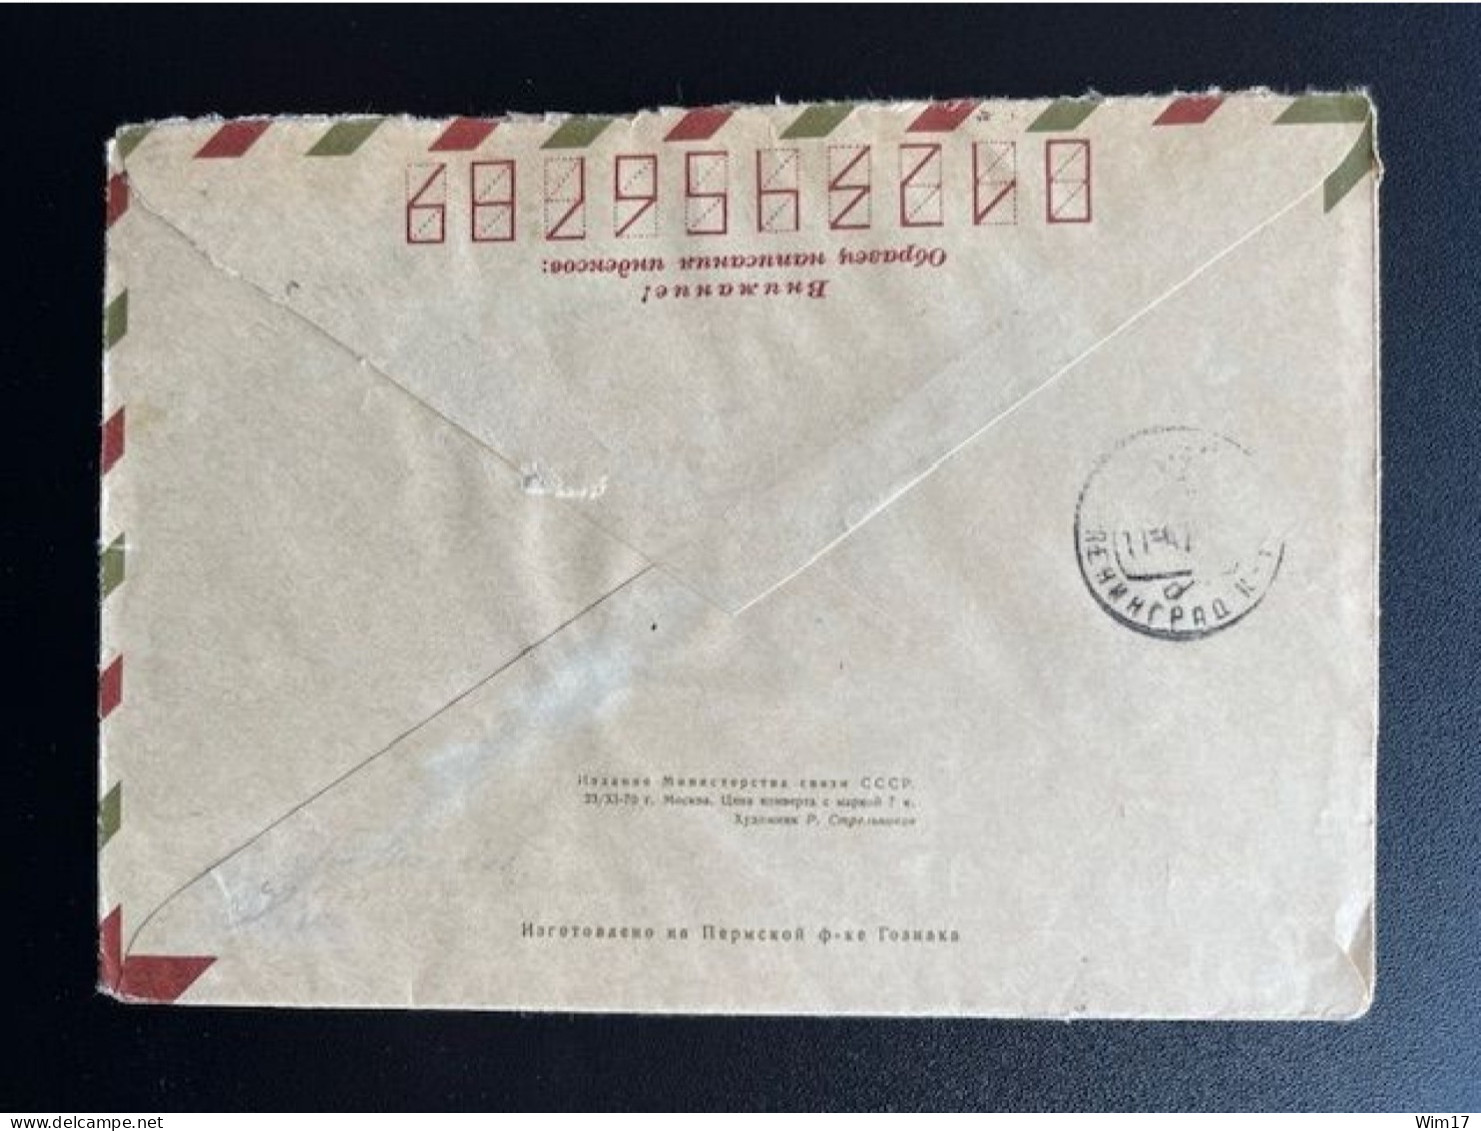 RUSSIA USSR 1971 REGISTERED LETTER MOSCOW 08-04-1971 SOVJET UNIE CCCP SOVIET UNION SPACE GAGARIN - Lettres & Documents